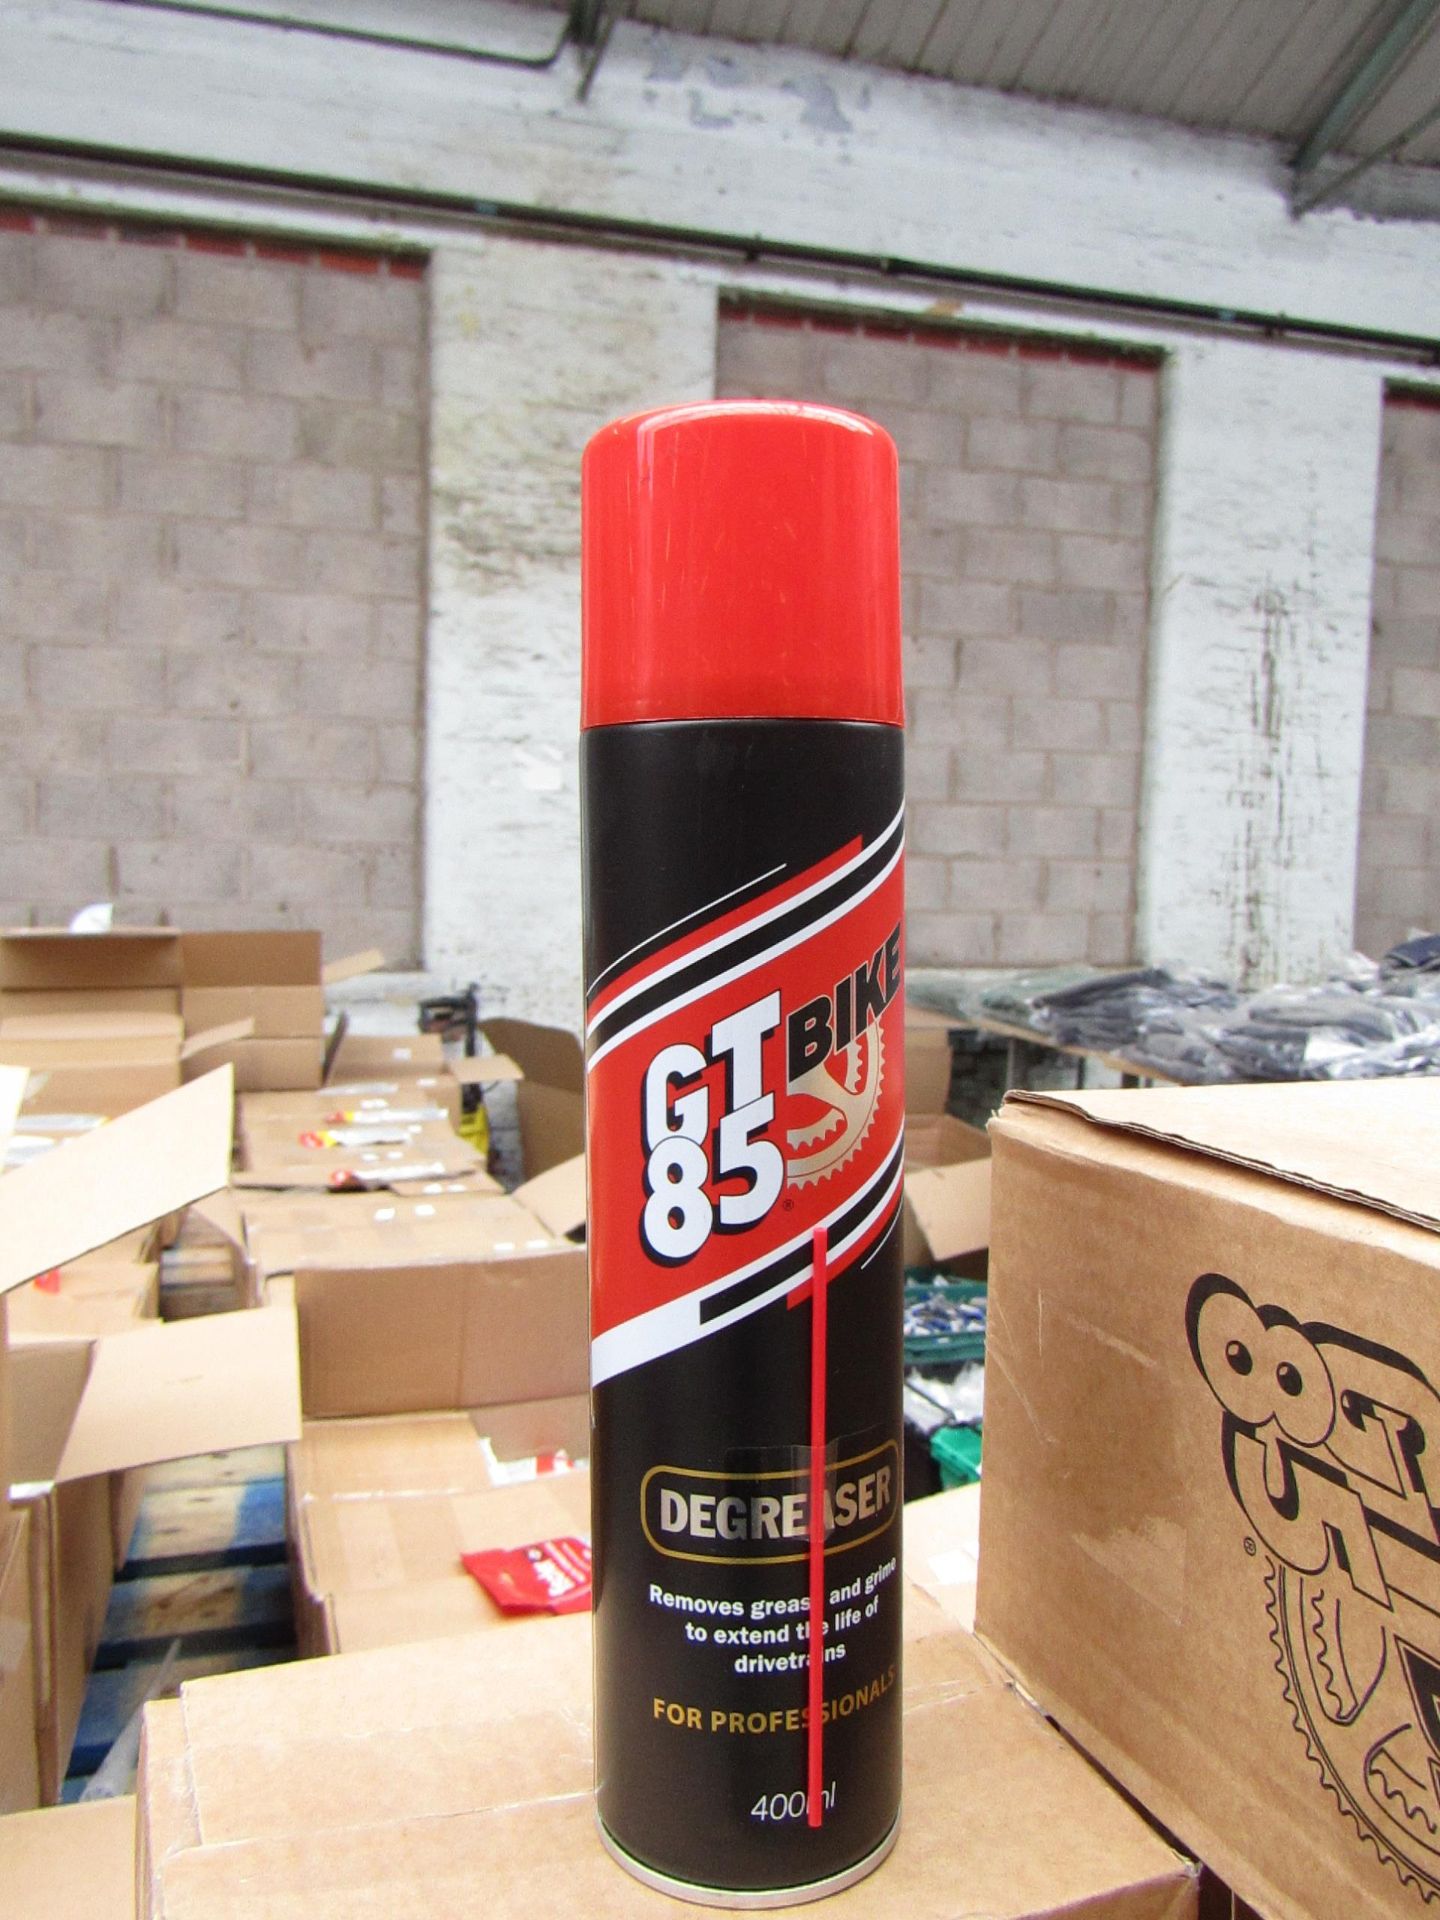 6x 400ml GT Bike 85 degreaser, all new and boxed.